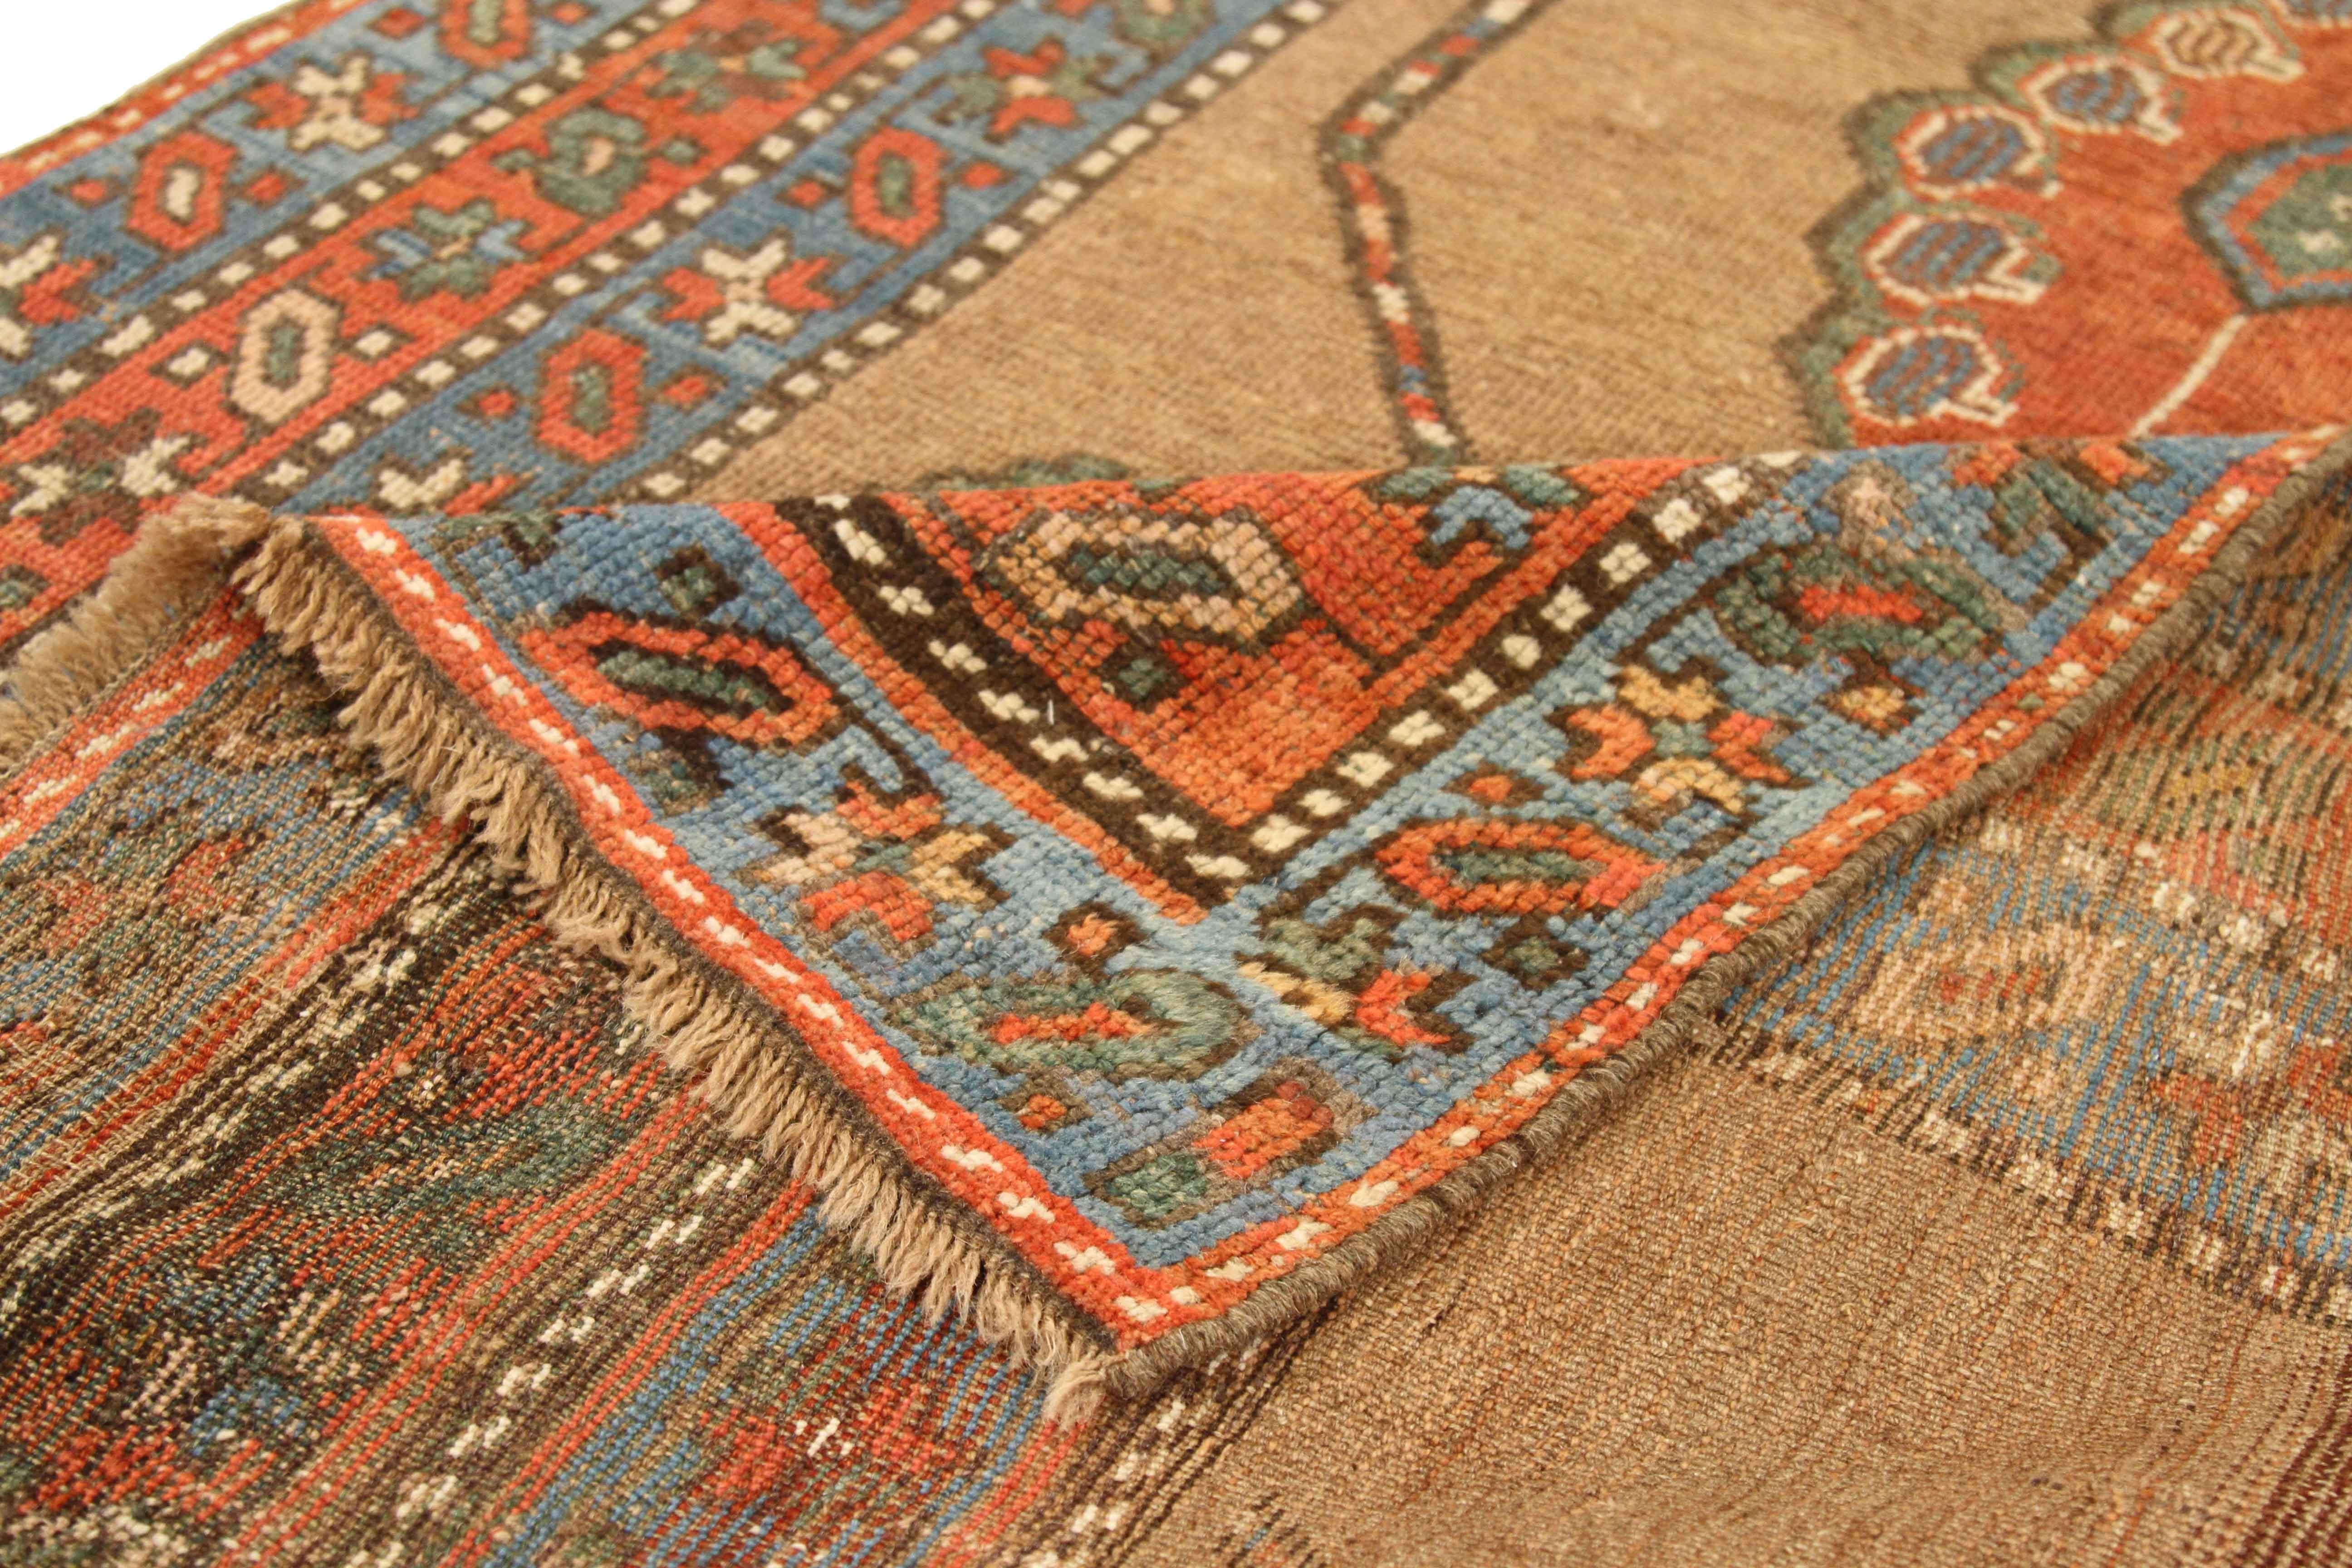 Antique Persian rug handwoven from the finest sheep’s wool and colored with all-natural vegetable dyes that are safe for humans and pets. It’s a traditional Kurdish design highlighted by large and small geometric medallions in blue and orange over a